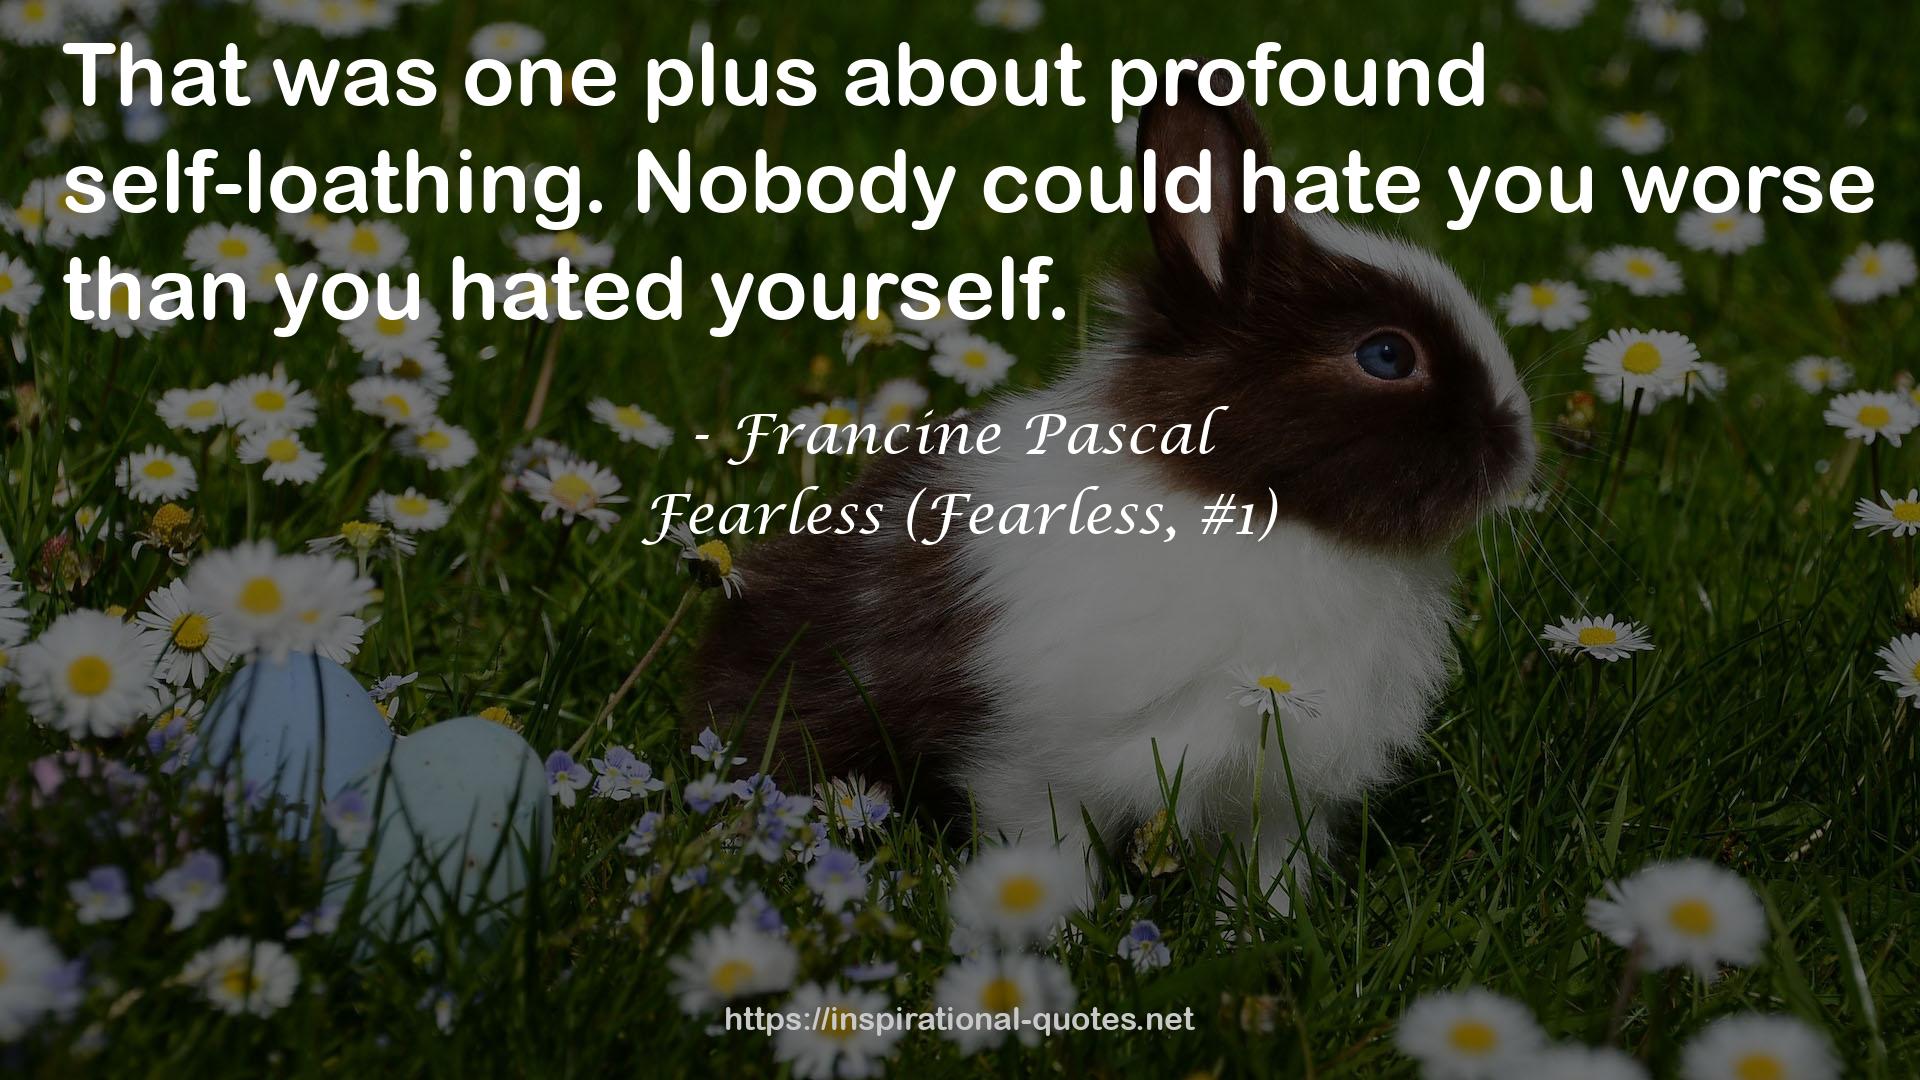 Fearless (Fearless, #1) QUOTES